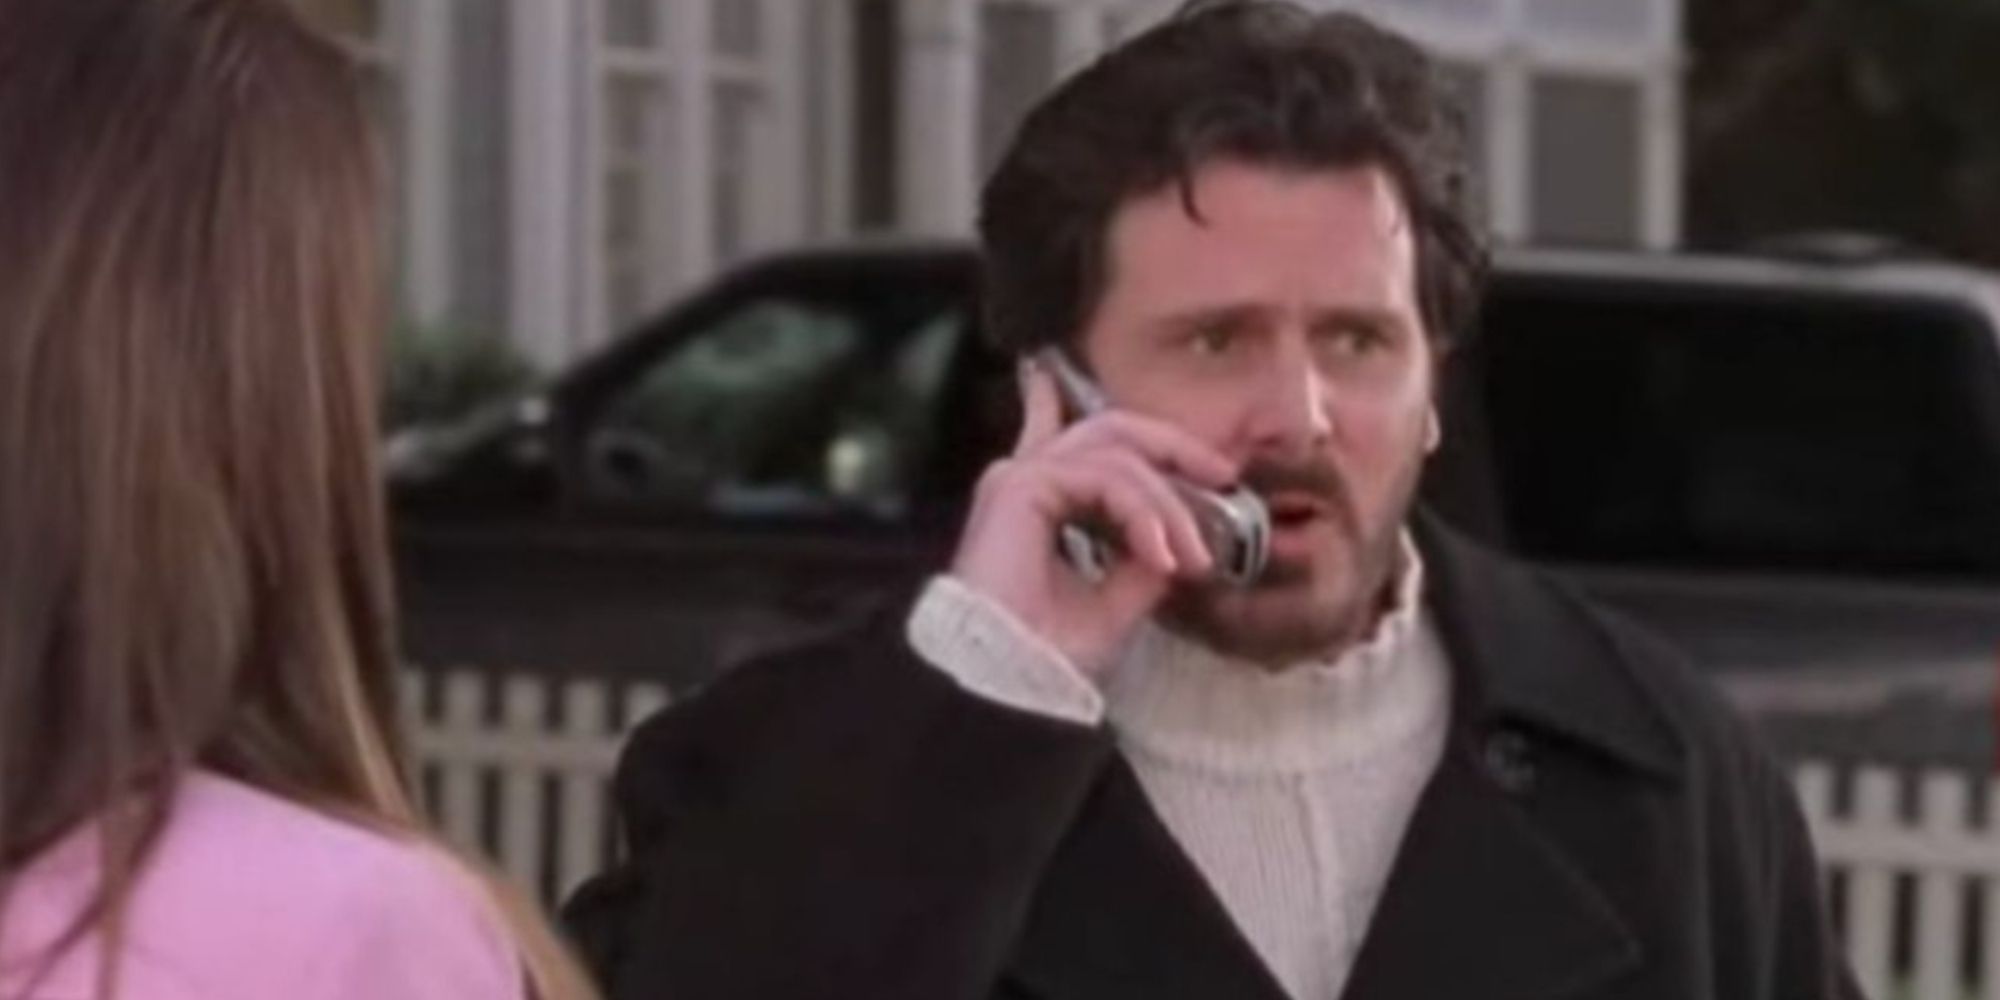 Jason on the phone in front of Lorelai on Gilmore Girls